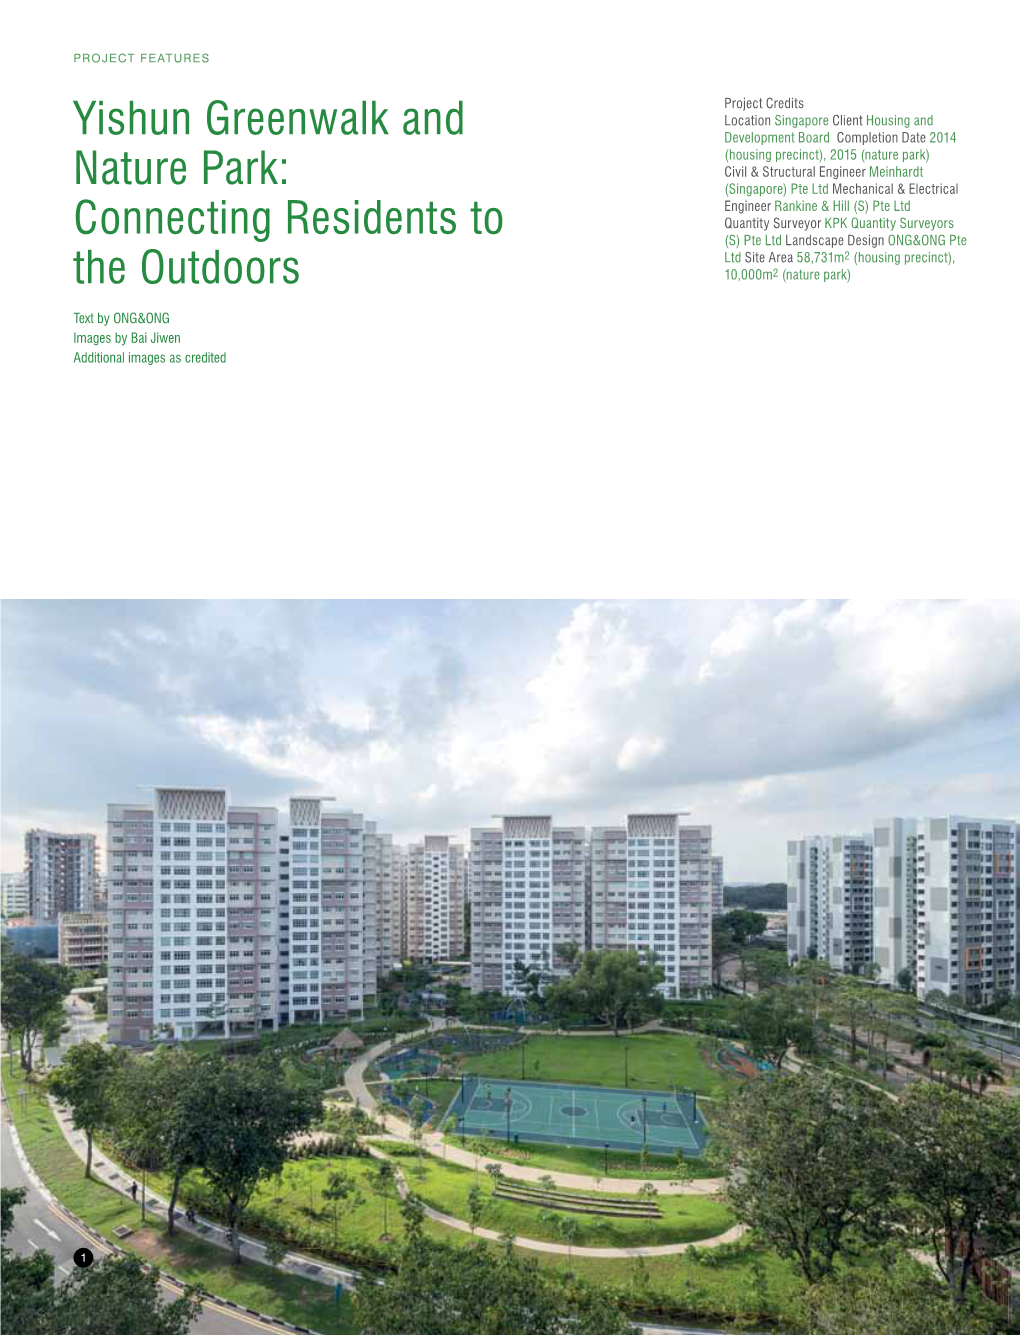 Yishun Greenwalk and Nature Park: Connecting Residents to the Outdoors